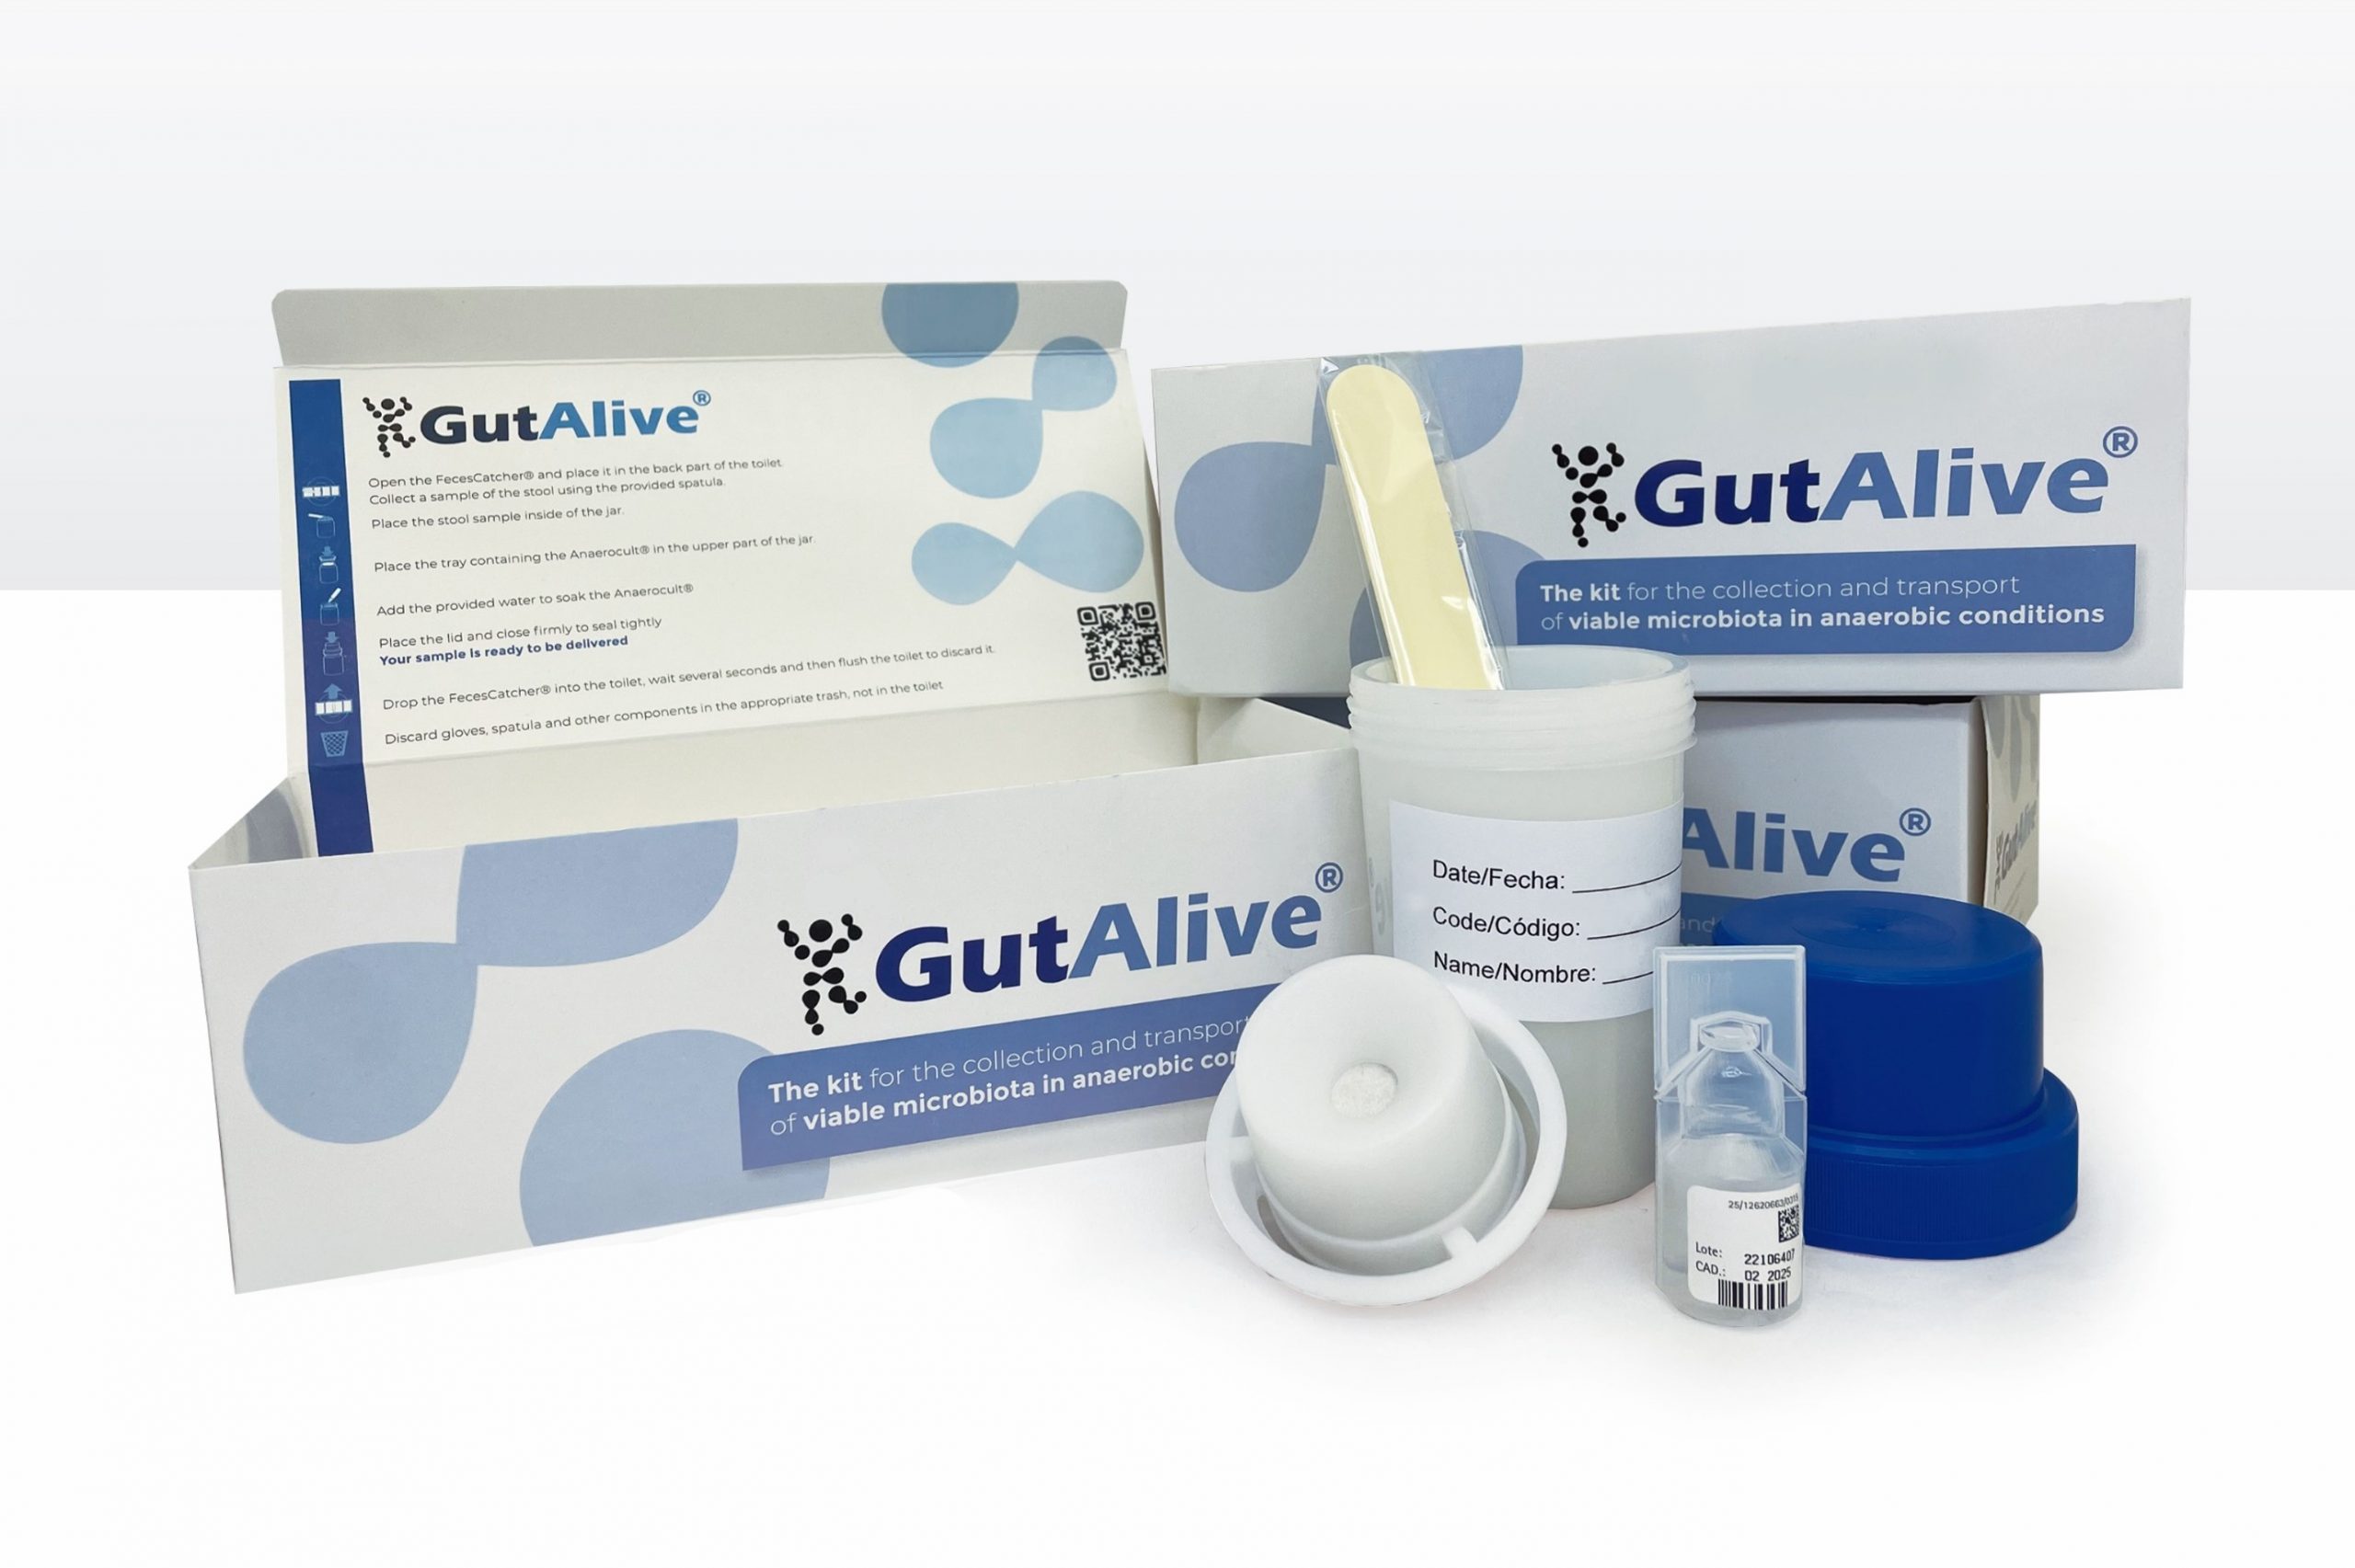 New GutAlive, the anaerobic microbiome collection kit